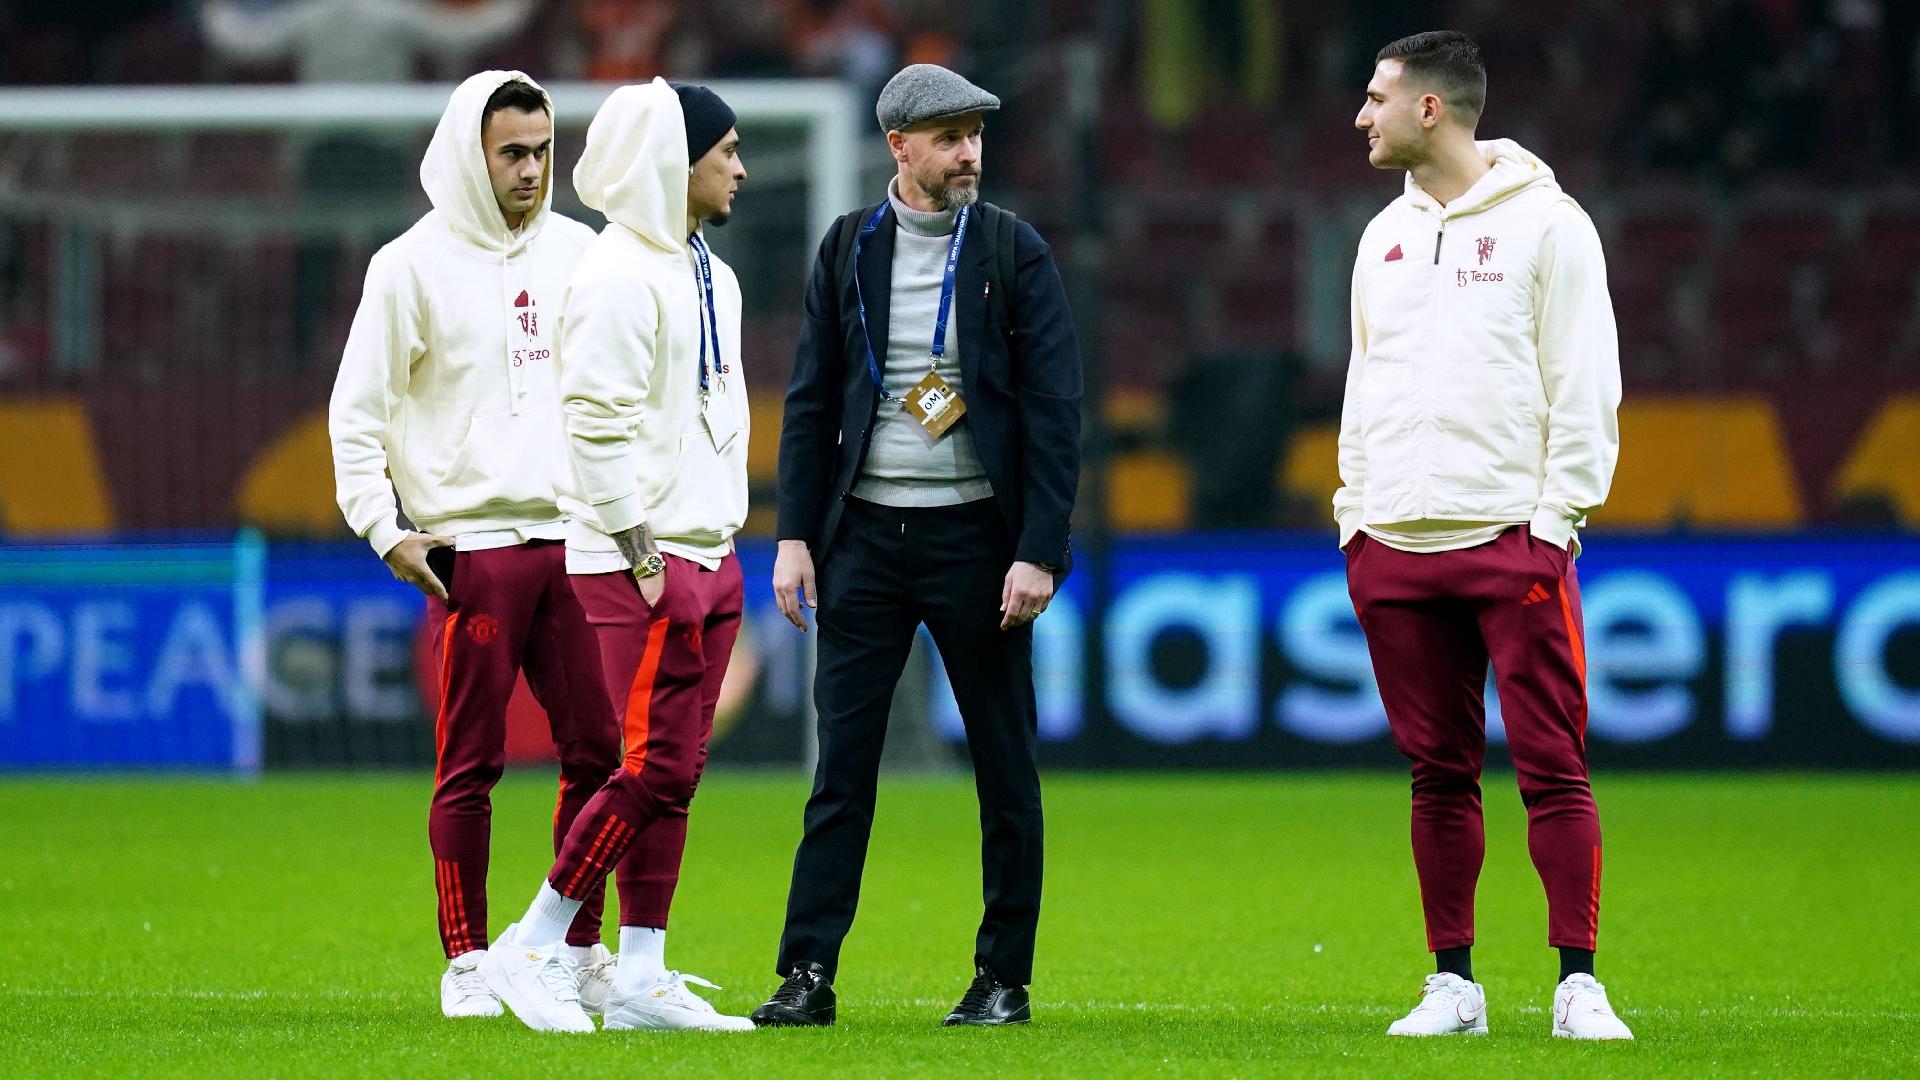 Bad weather puts Man Utd’s Champions League match at Galatasaray in doubt